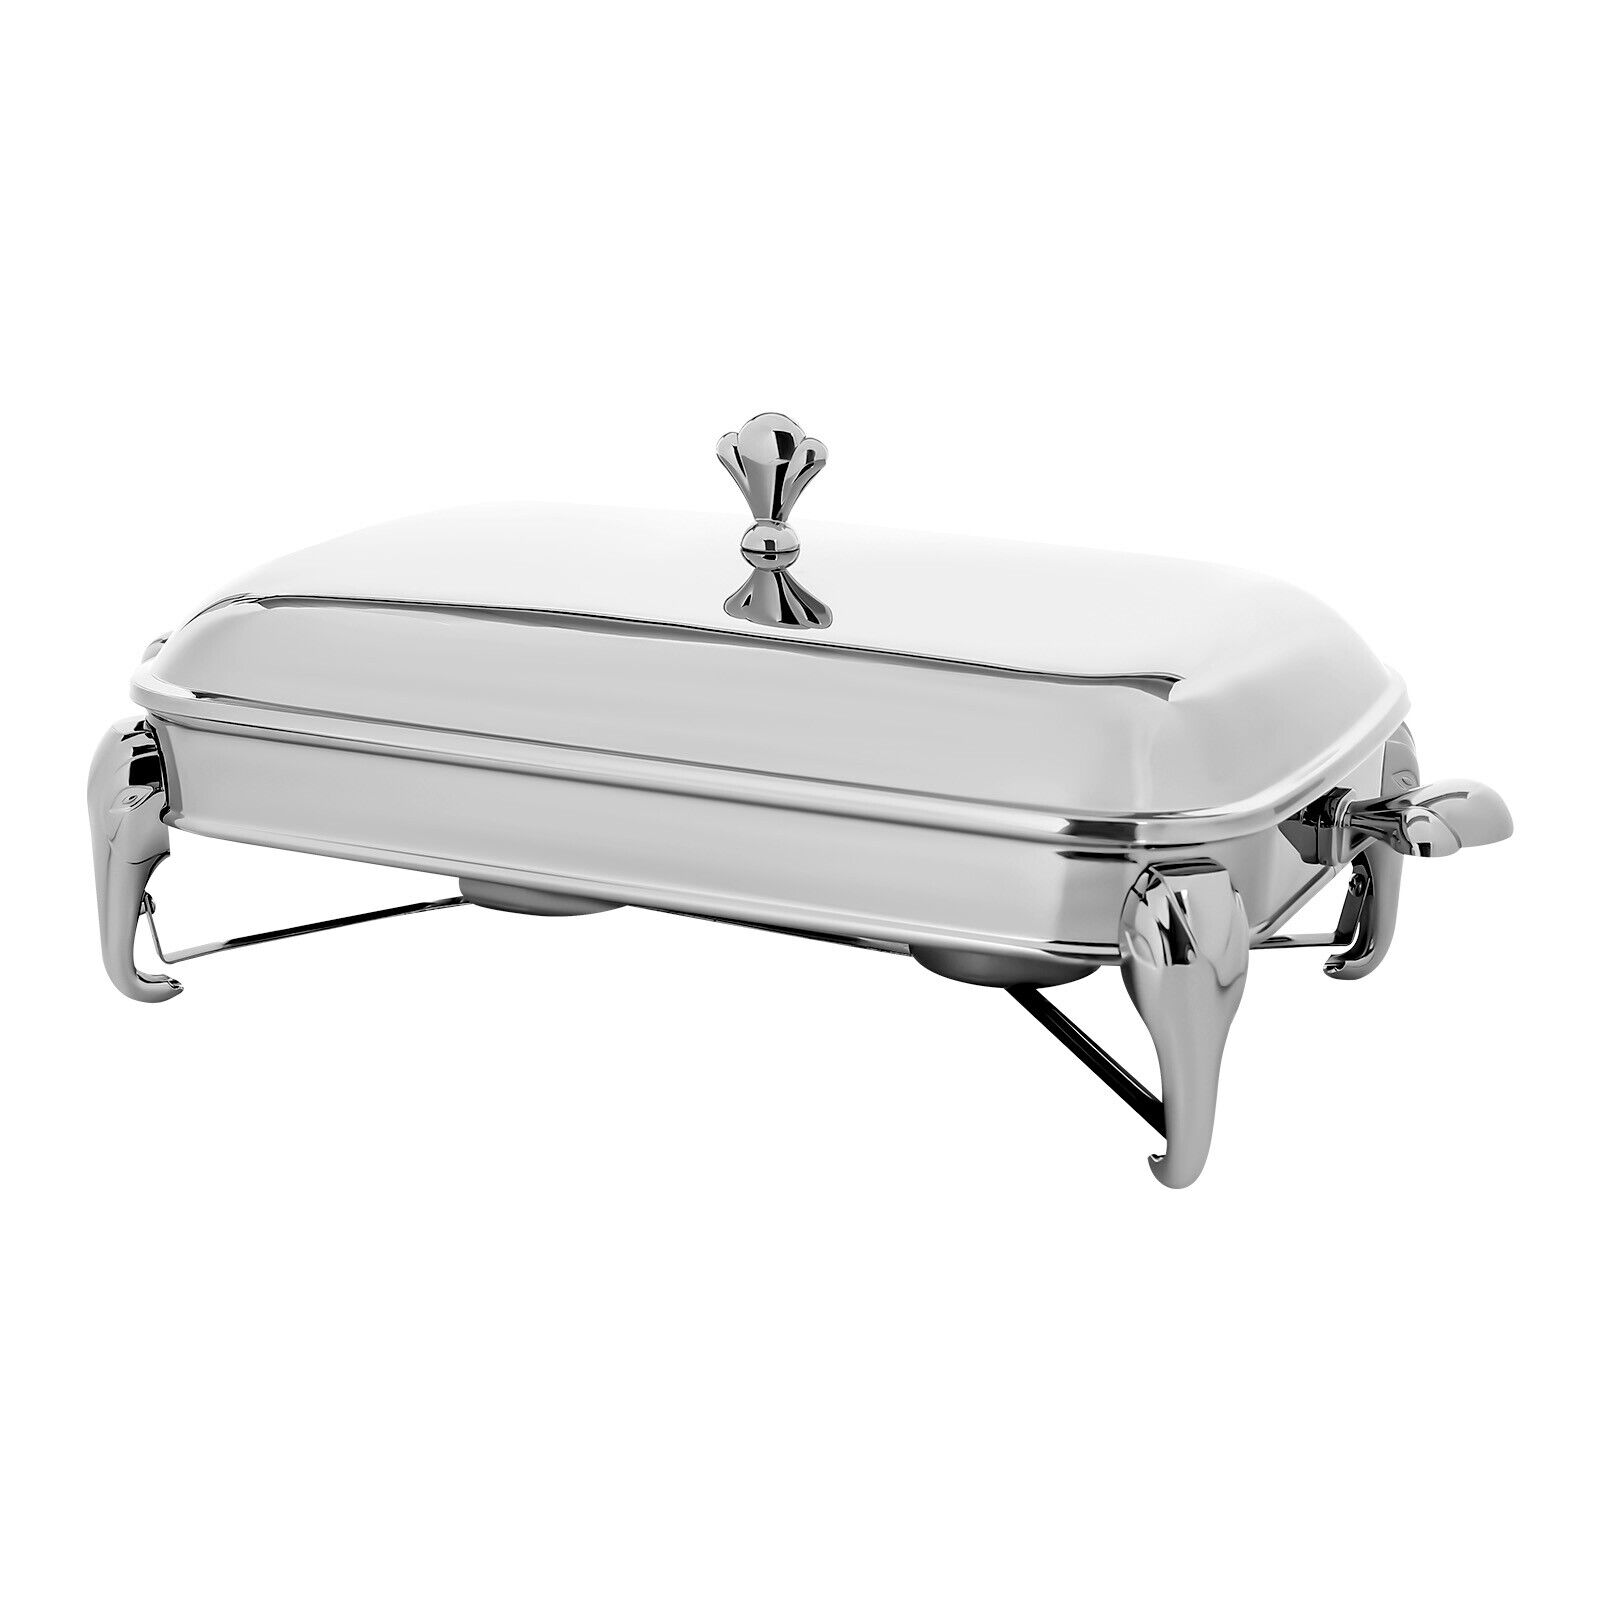 Stainless Steel 2.9L Silver Buffet Set Chafing Dish Rectangular Tray Food Warmer Unbranded - фотография #9